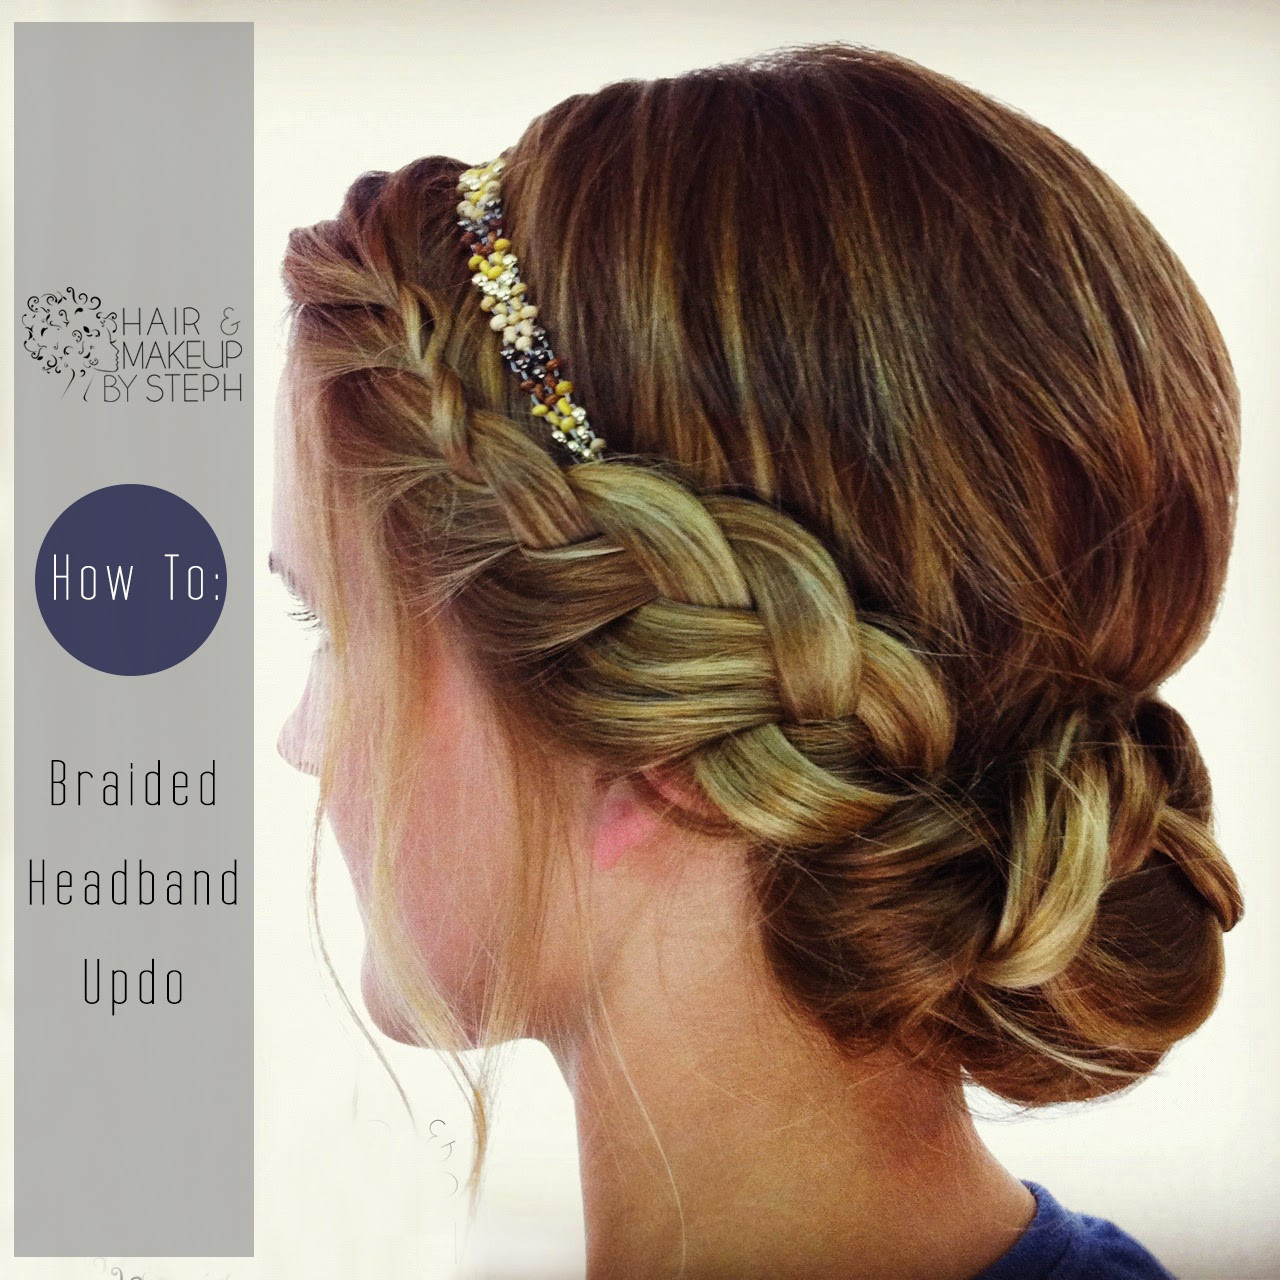 Best ideas about How To Do Updo Hairstyles
. Save or Pin Hair and Make up by Steph How To Braided Headband Updo Now.